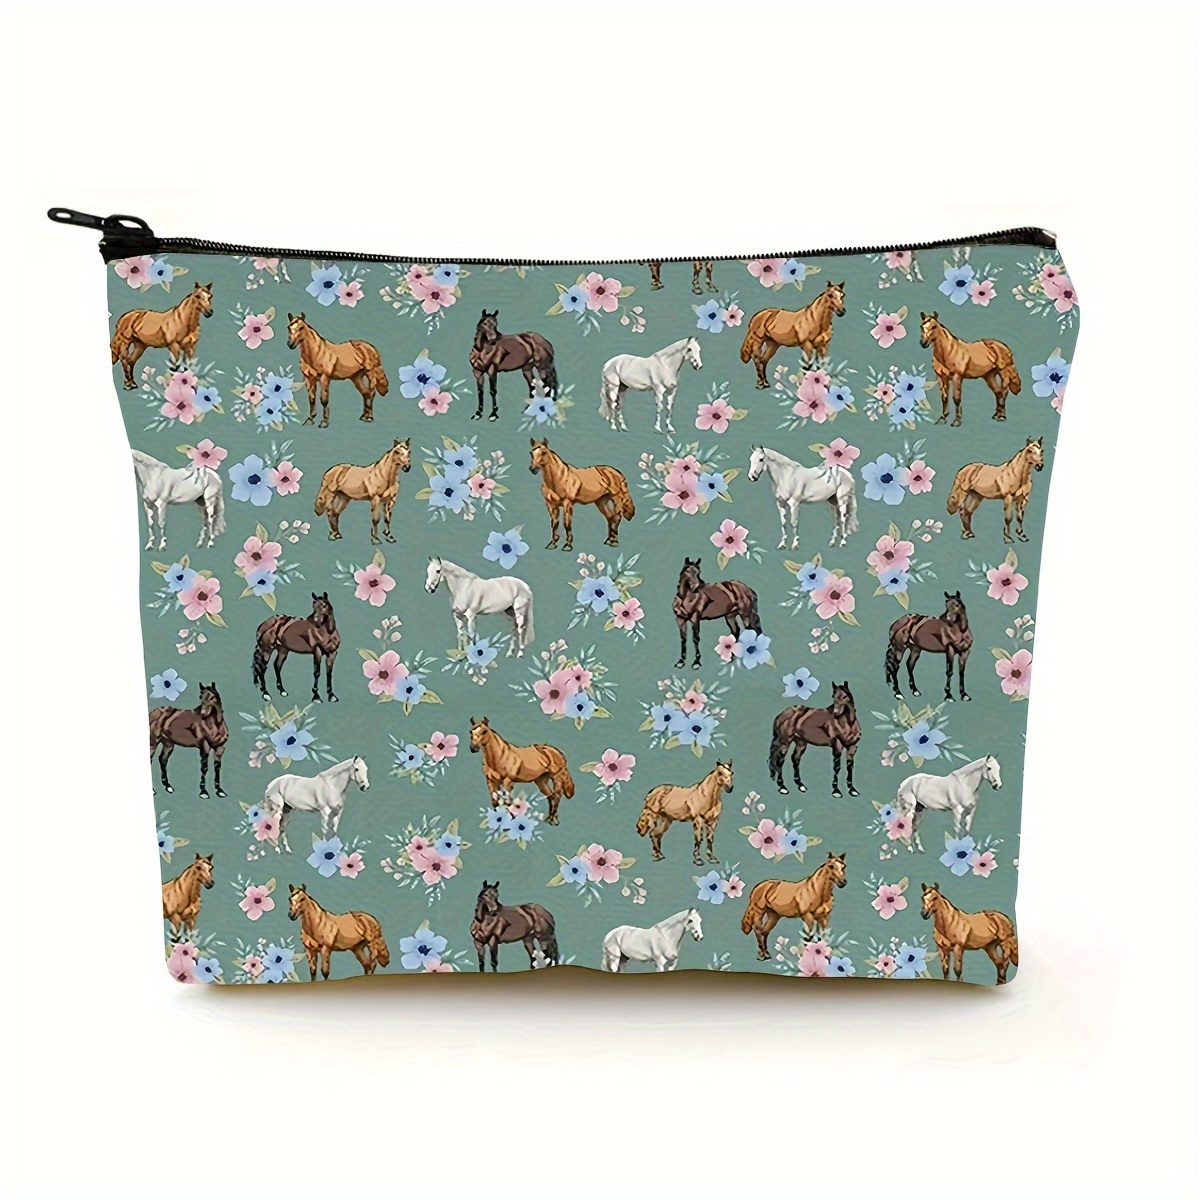 

stylish" Chic Horse Print Makeup Bag - Ideal Gift For Women, Best Friends & Sisters - Cotton Zippered Cosmetic Pouch With Travel Accessories - Perfect For Halloween & Mother's Day